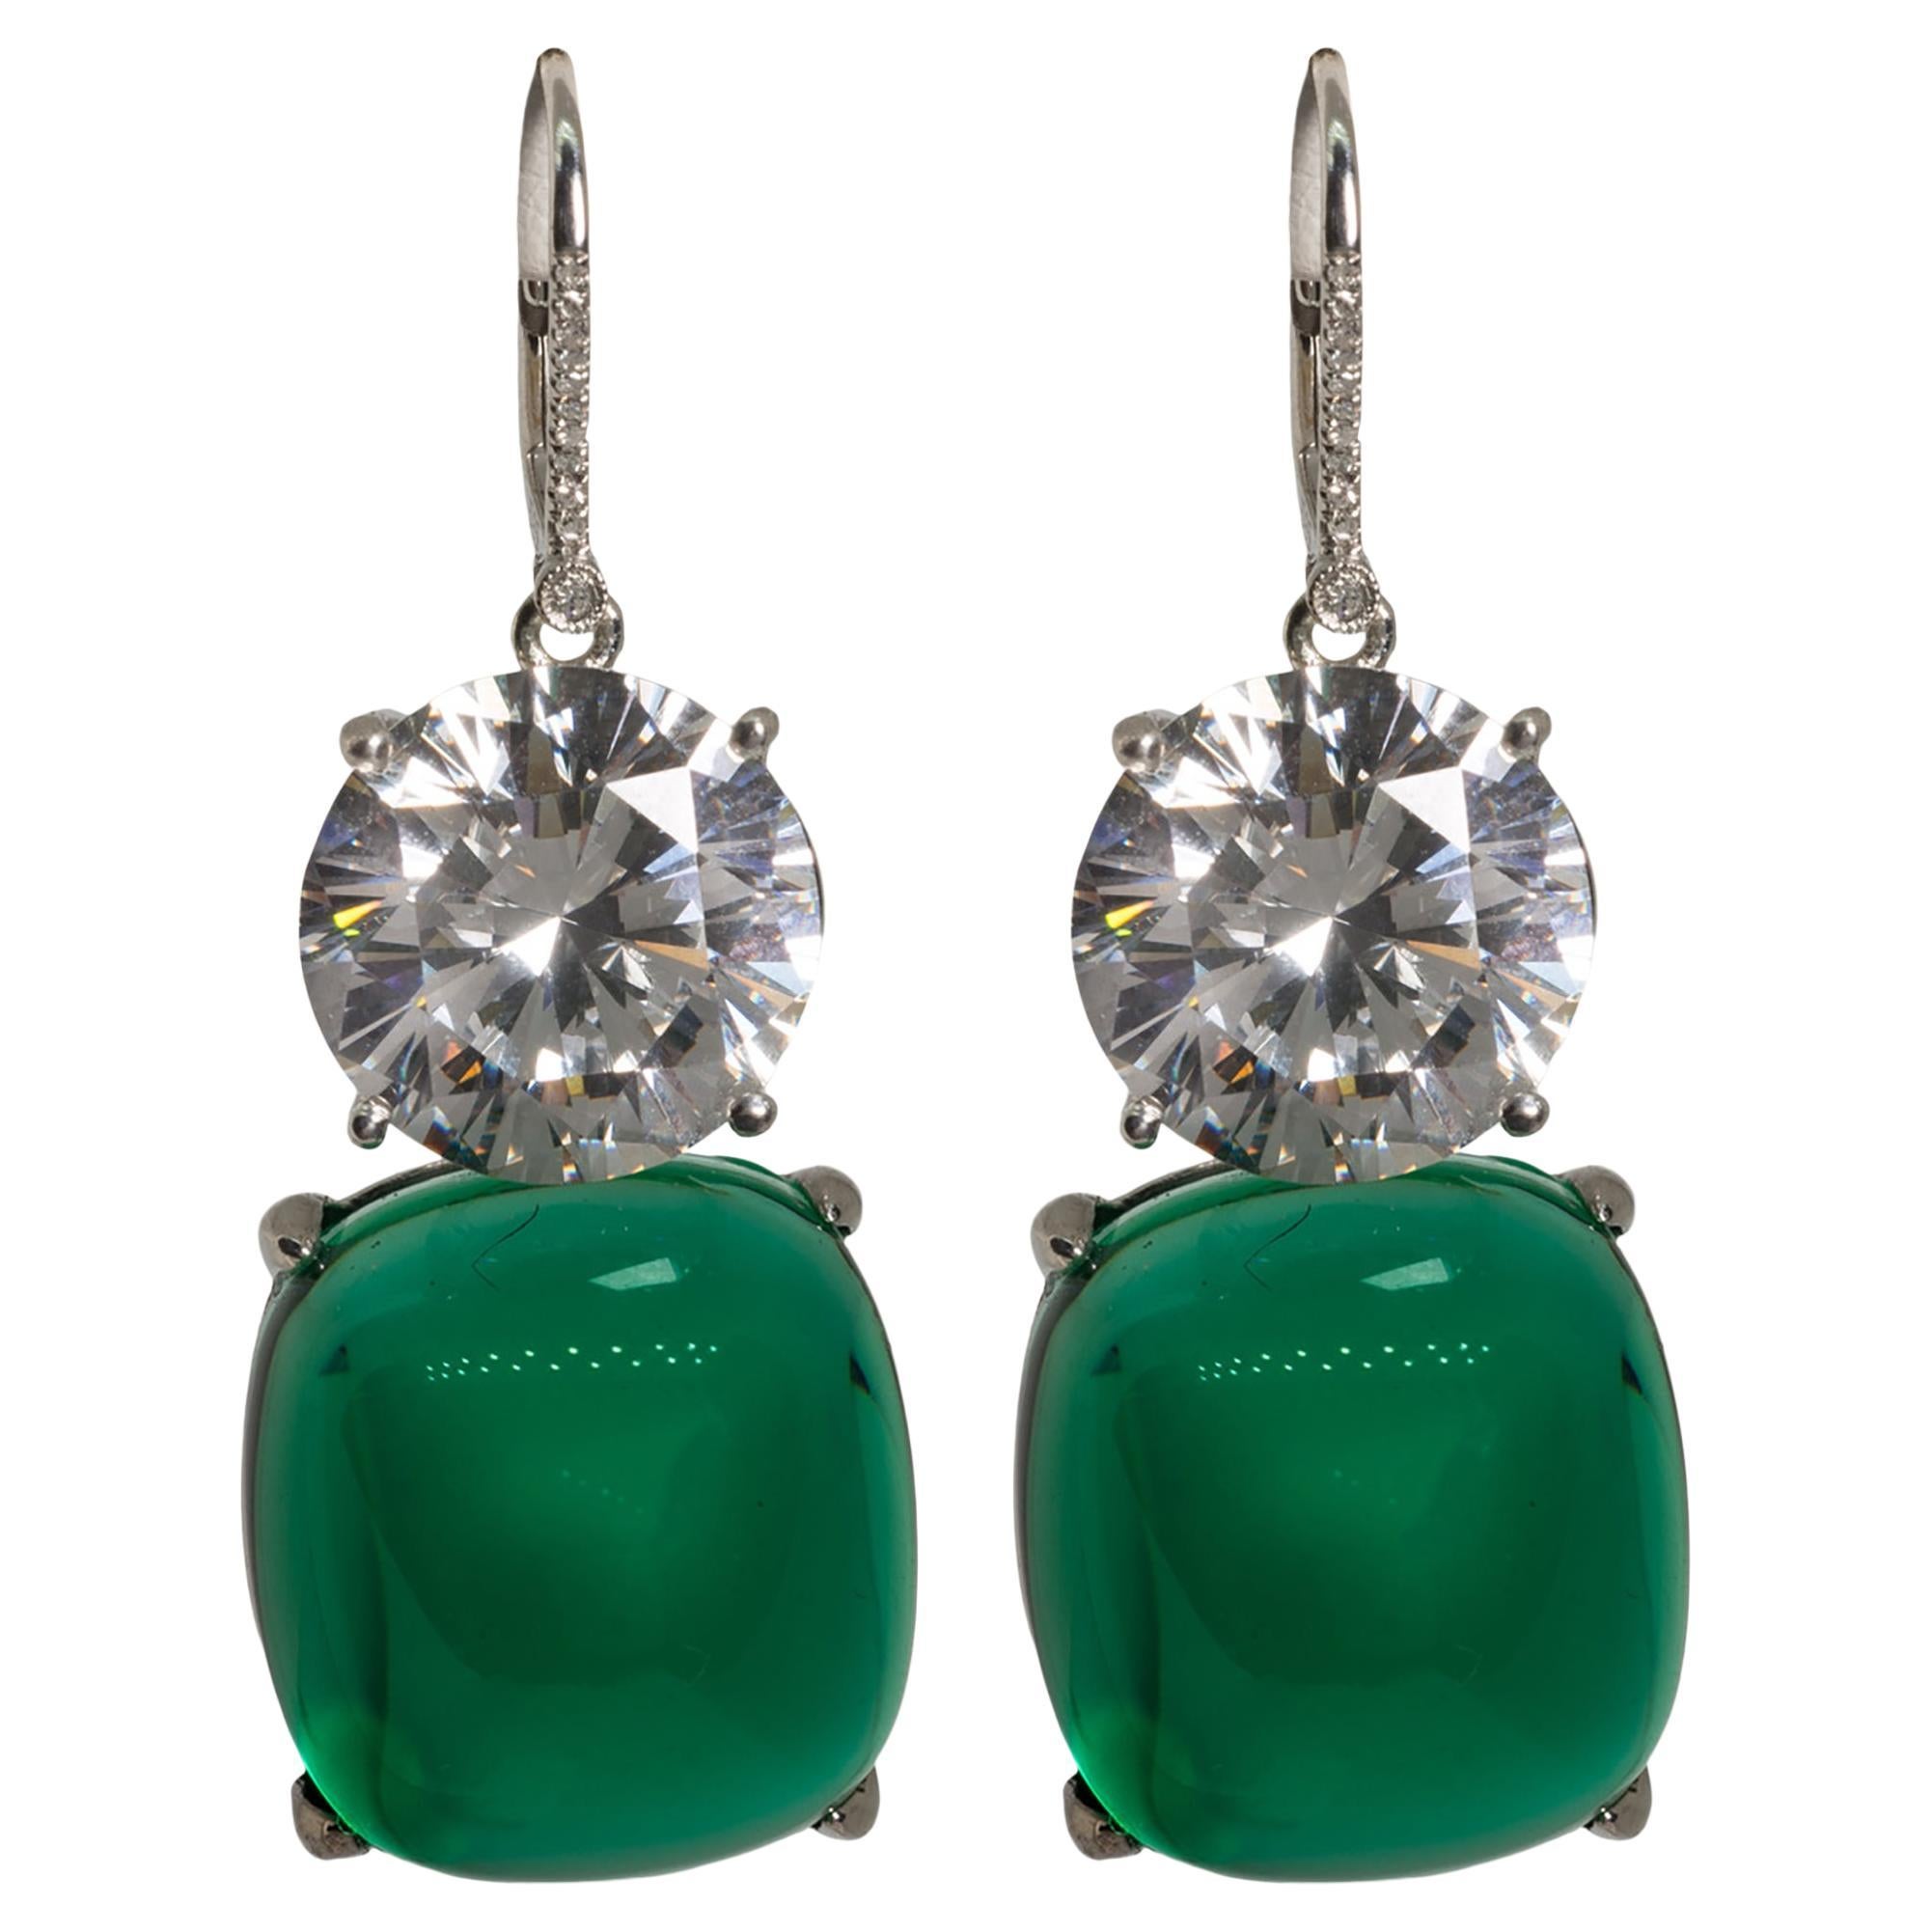 Costume Jewelry Diamond Large Cabochon Emerald Earrings by Clive Kandel